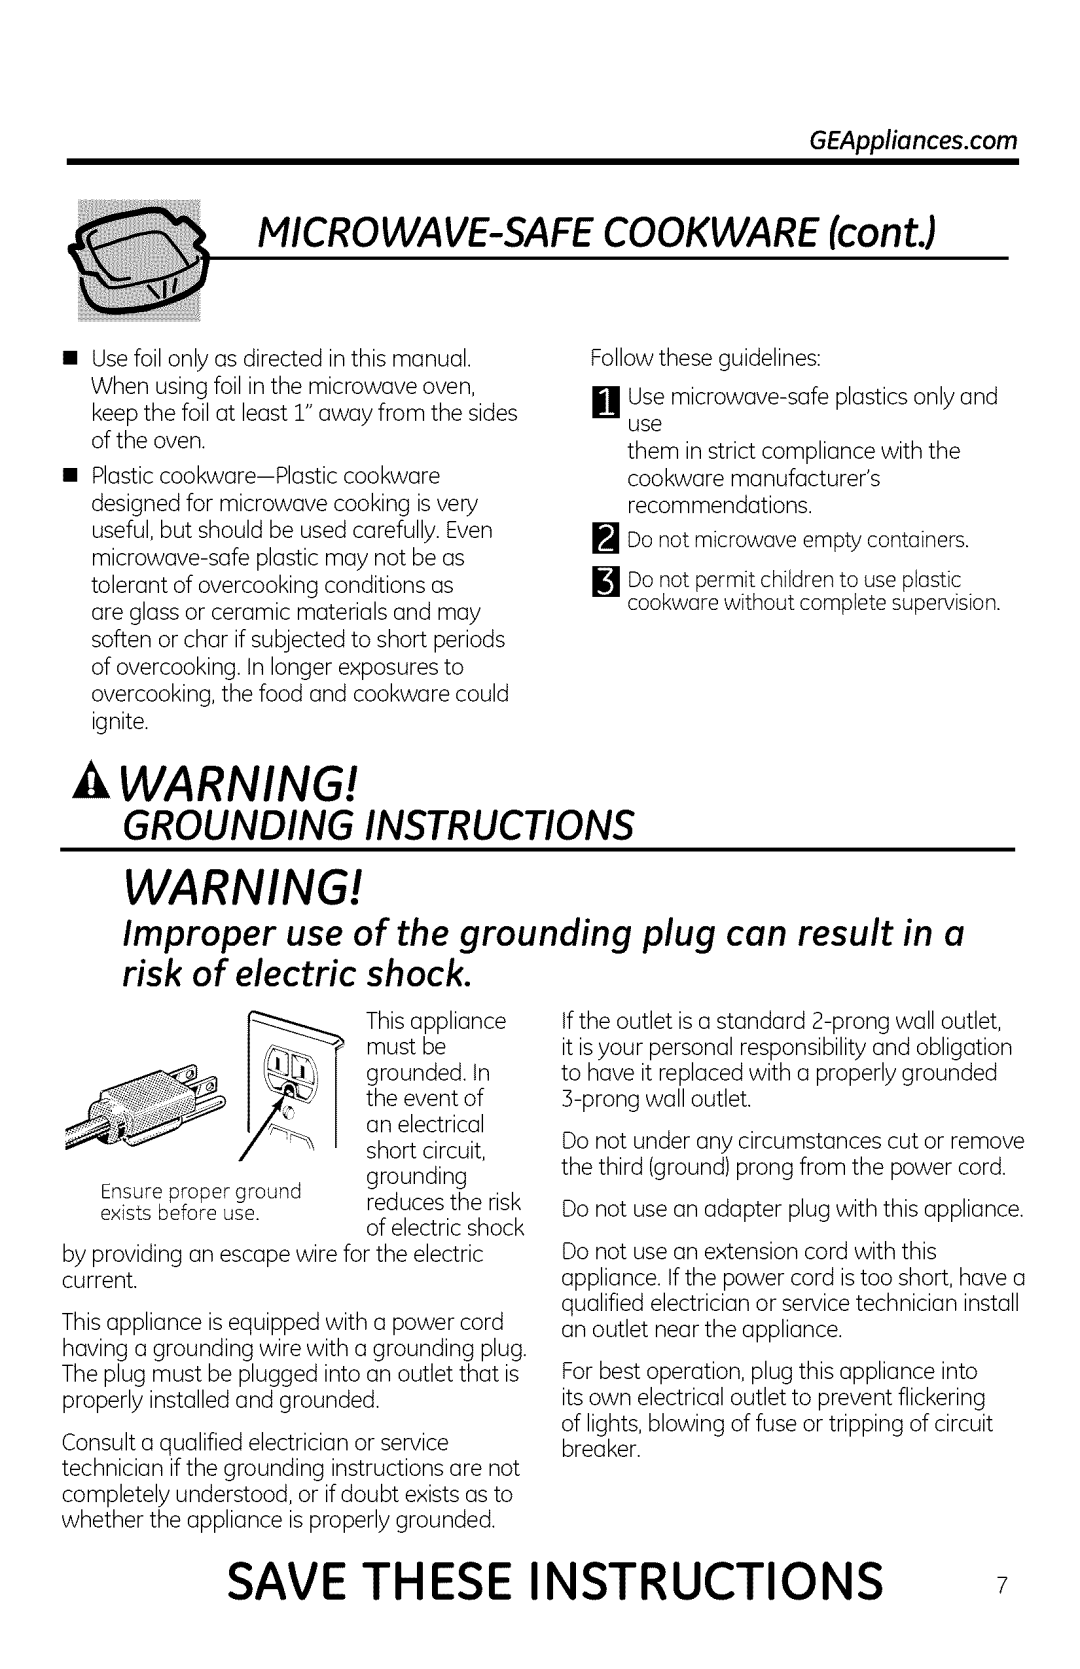 GE JVM1950, DVM1950, JNM1951 MICROWAVE-SAFECOOKWARE cont, GEAppliances.com, Save These Instructions, Grounding Instructions 